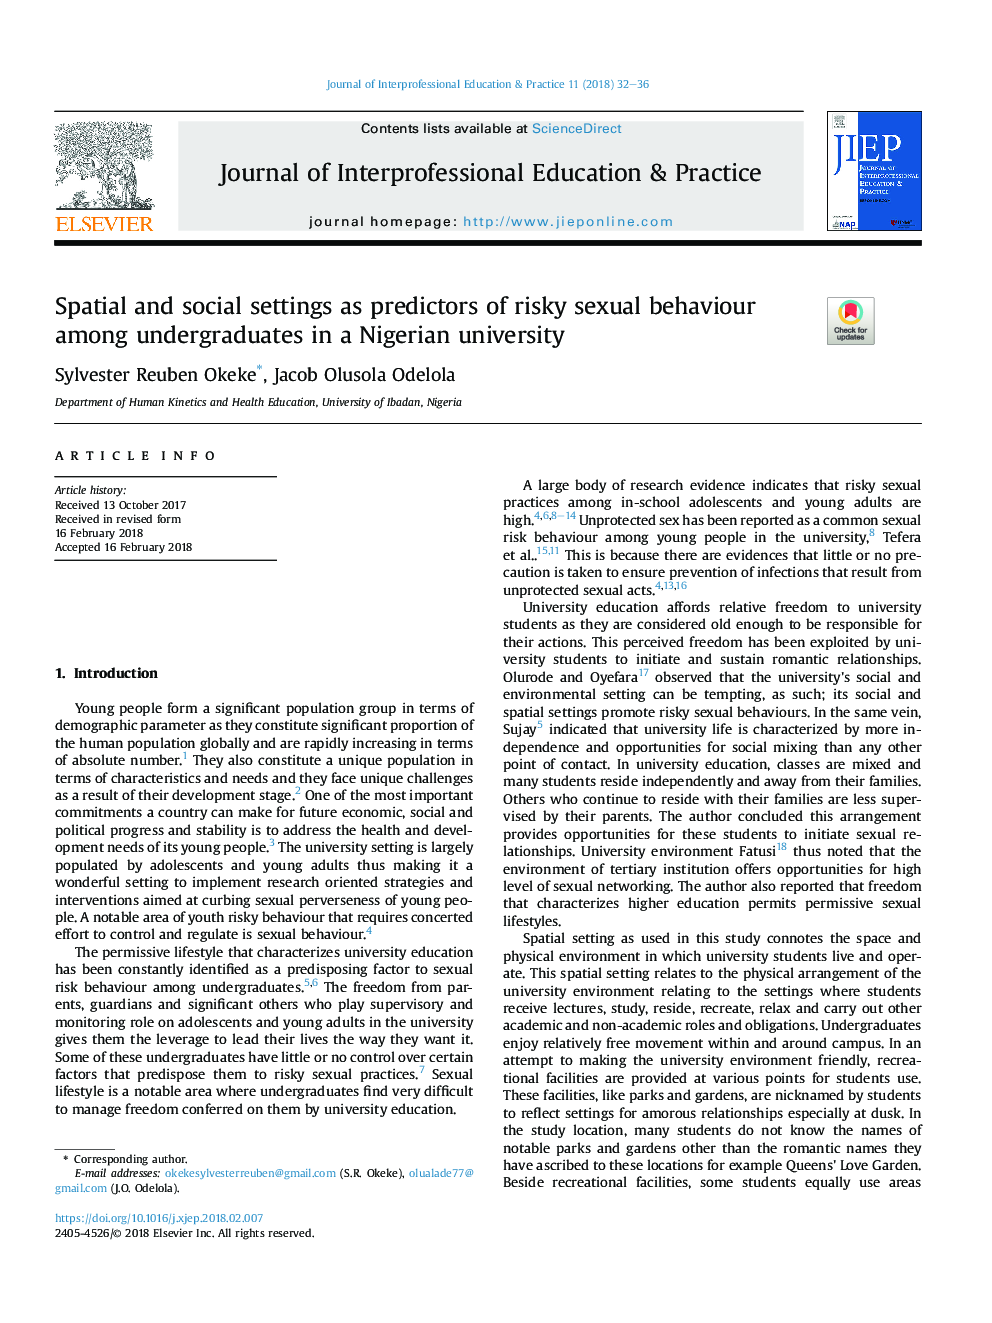 Spatial and social settings as predictors of risky sexual behaviour among undergraduates in a Nigerian university